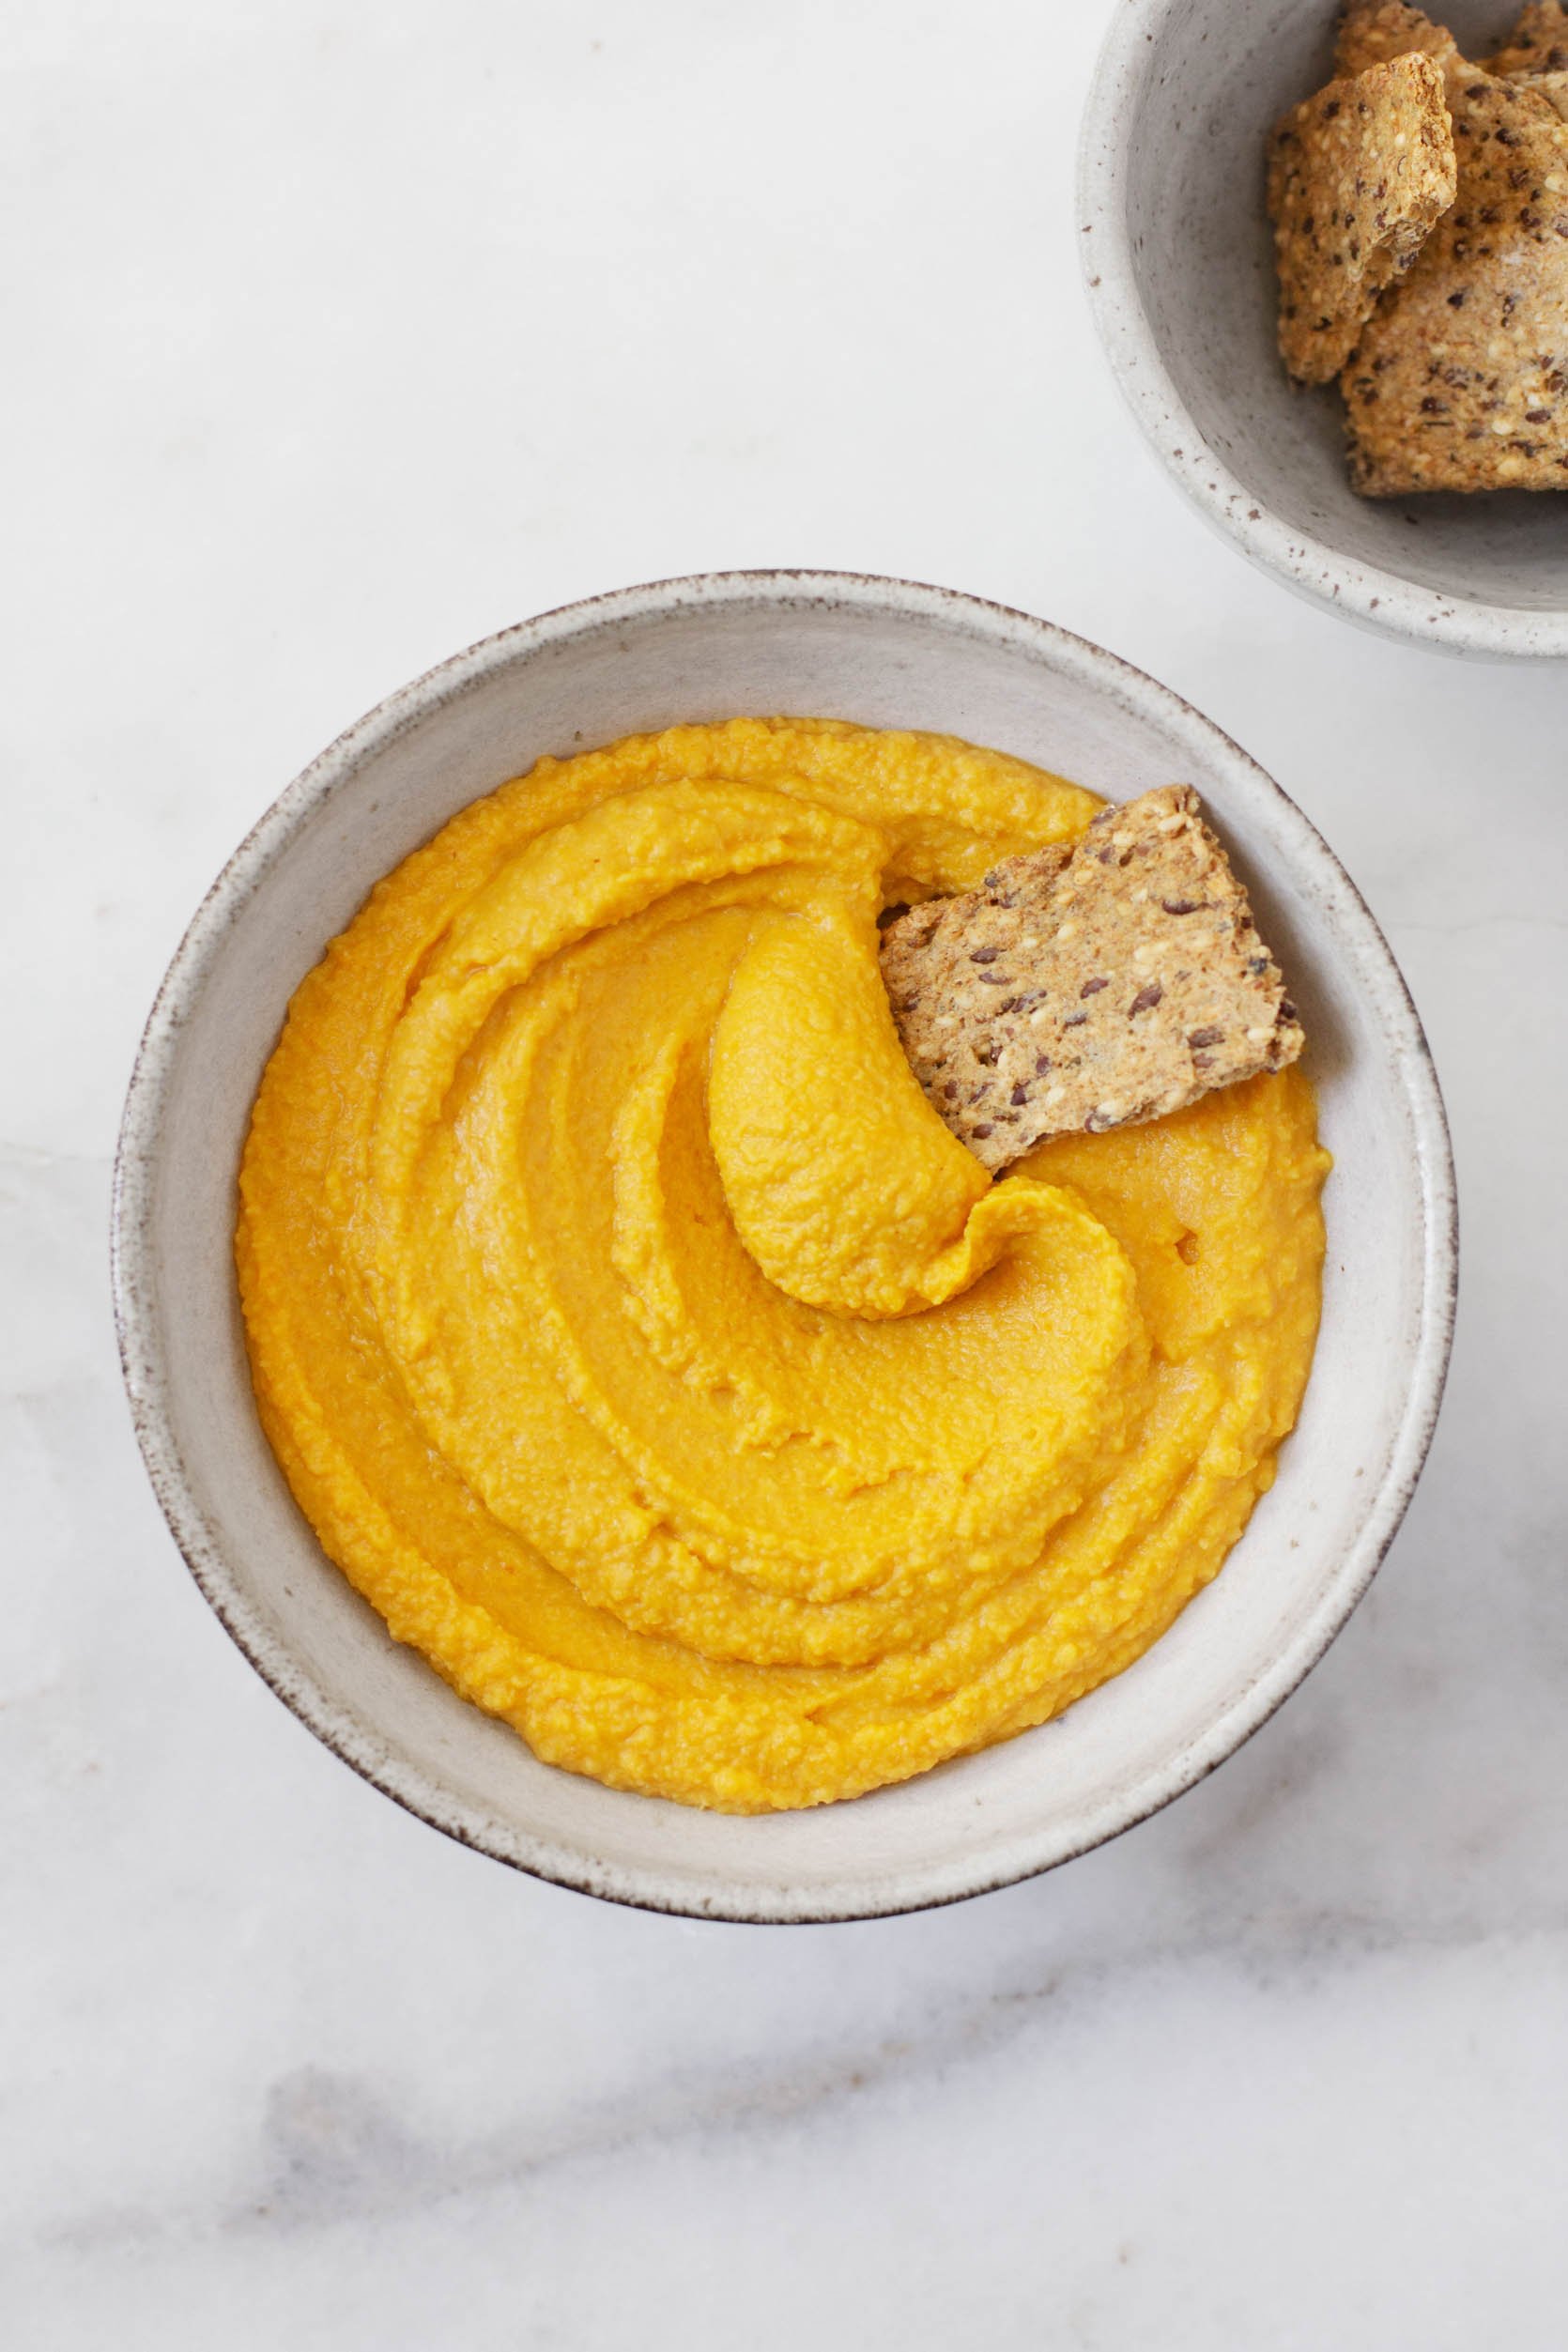 Roasted Carrot Hummus | A Creamy, Sweet Dip and Spread